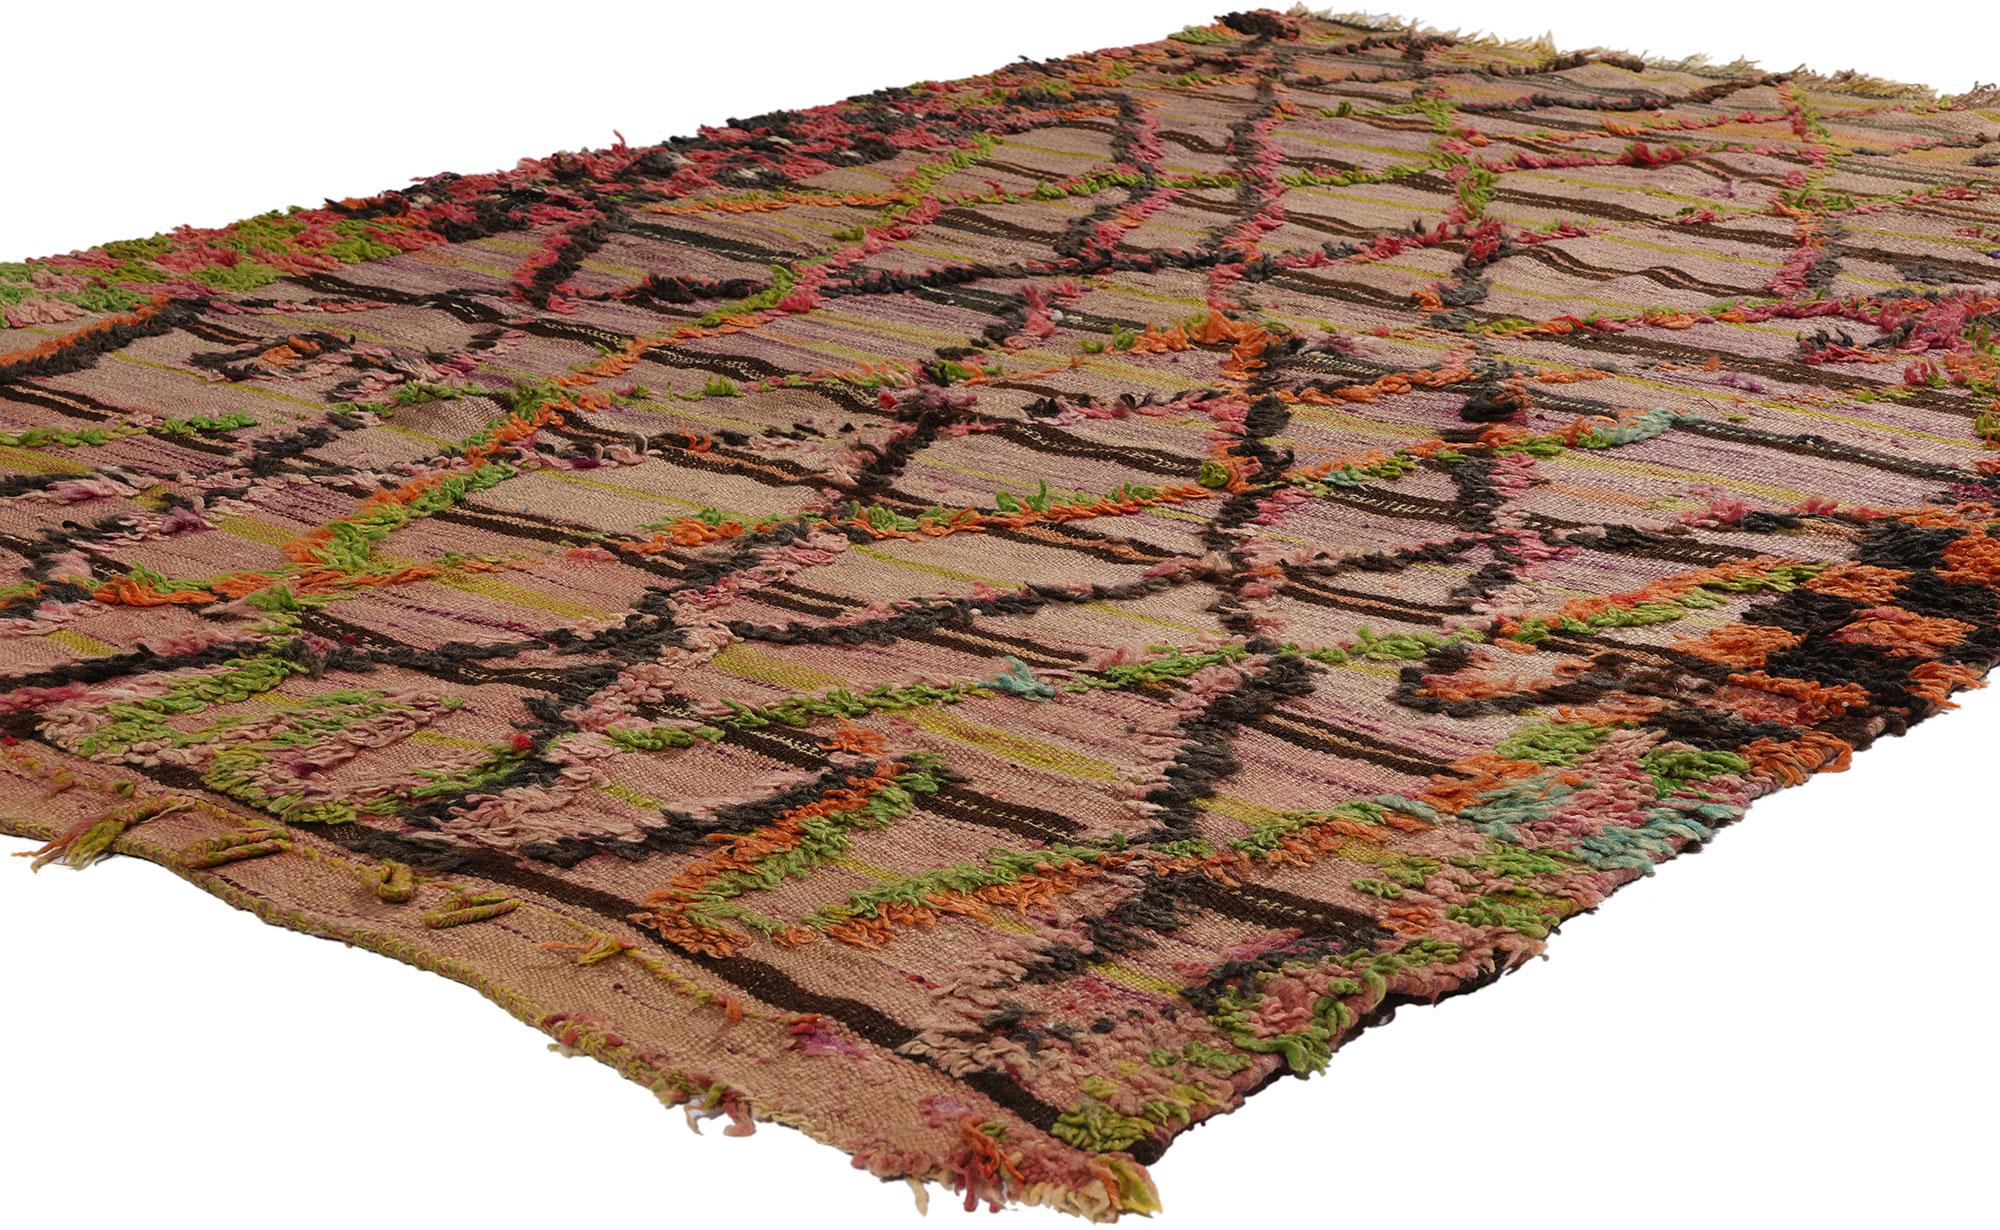 21837 Vintage High-Low Taznakht Moroccan Rug, 04'09 x 07'02. A vintage Taznakht rug refers to a type of handwoven rug originating from the Taznakht region in the High Atlas Mountains of Morocco. These rugs are known for their vibrant colors,